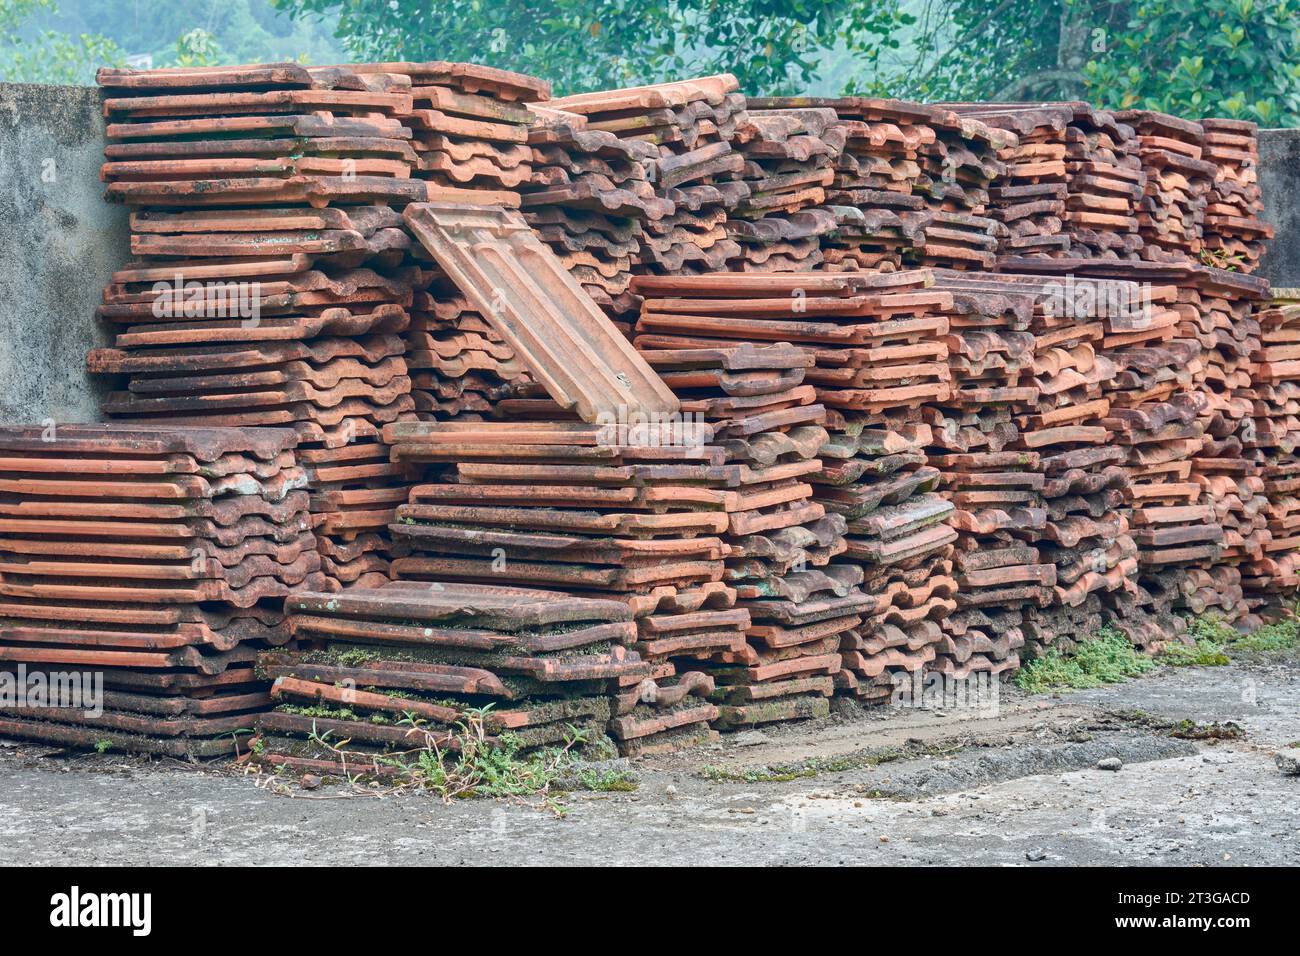 pile of old used roof tiles, discarded red earthen roofing tiles arranged in outdoor Stock Photo